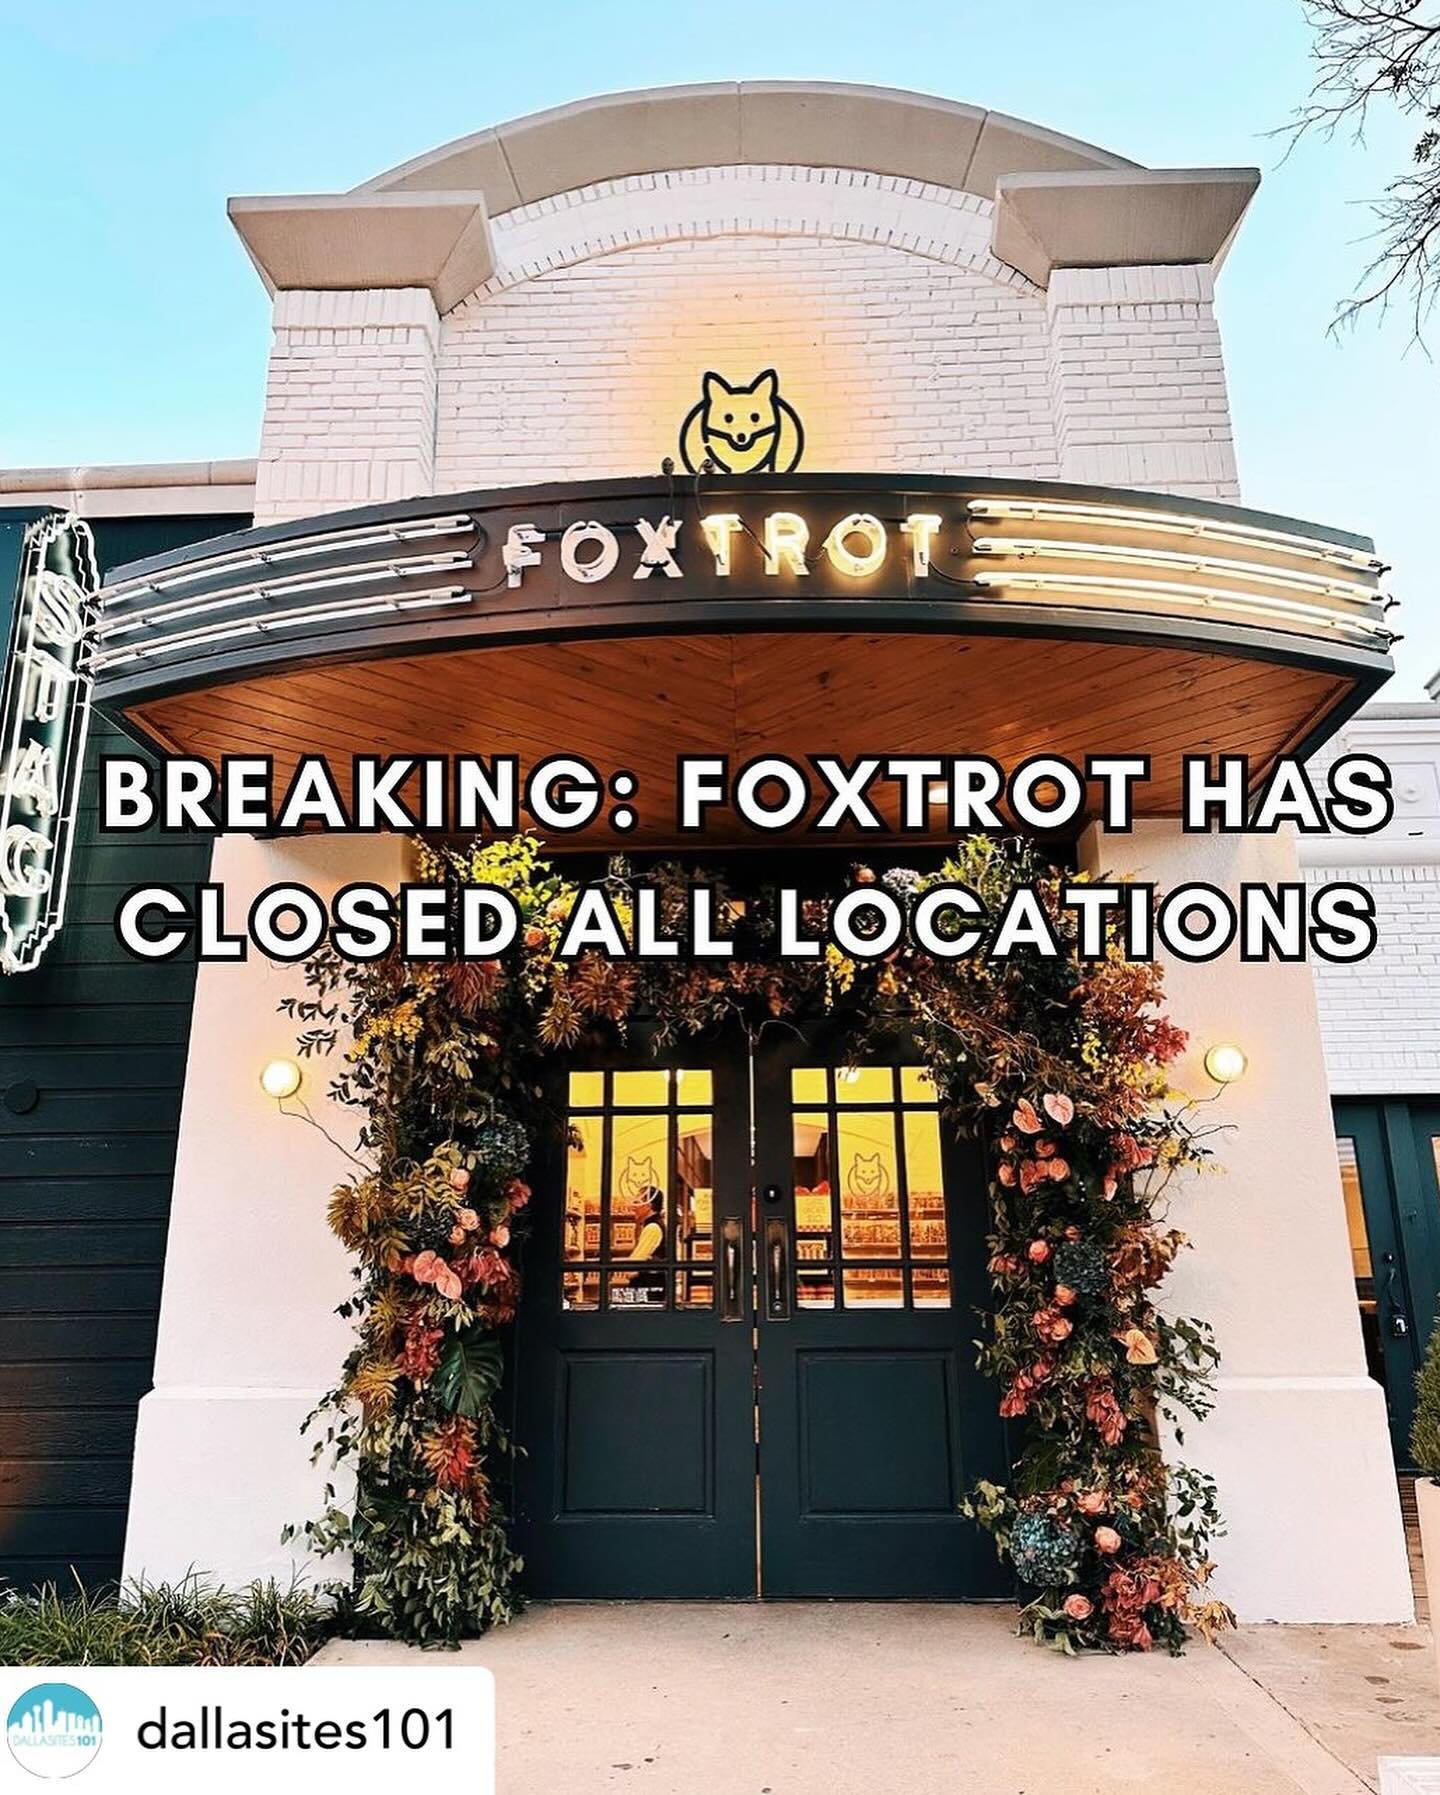 We are so sad to see Fox Trot go. So many of us frequented the Hillcrest location. More details below from @dallasites101 

@dallasites101 BREAKING: FOXTROT MARKET HAS CLOSED ALL LOCATIONS AS OF THIS MORNING 4/23, EFFECTIVE IMMEDIATELY! 

This one hu